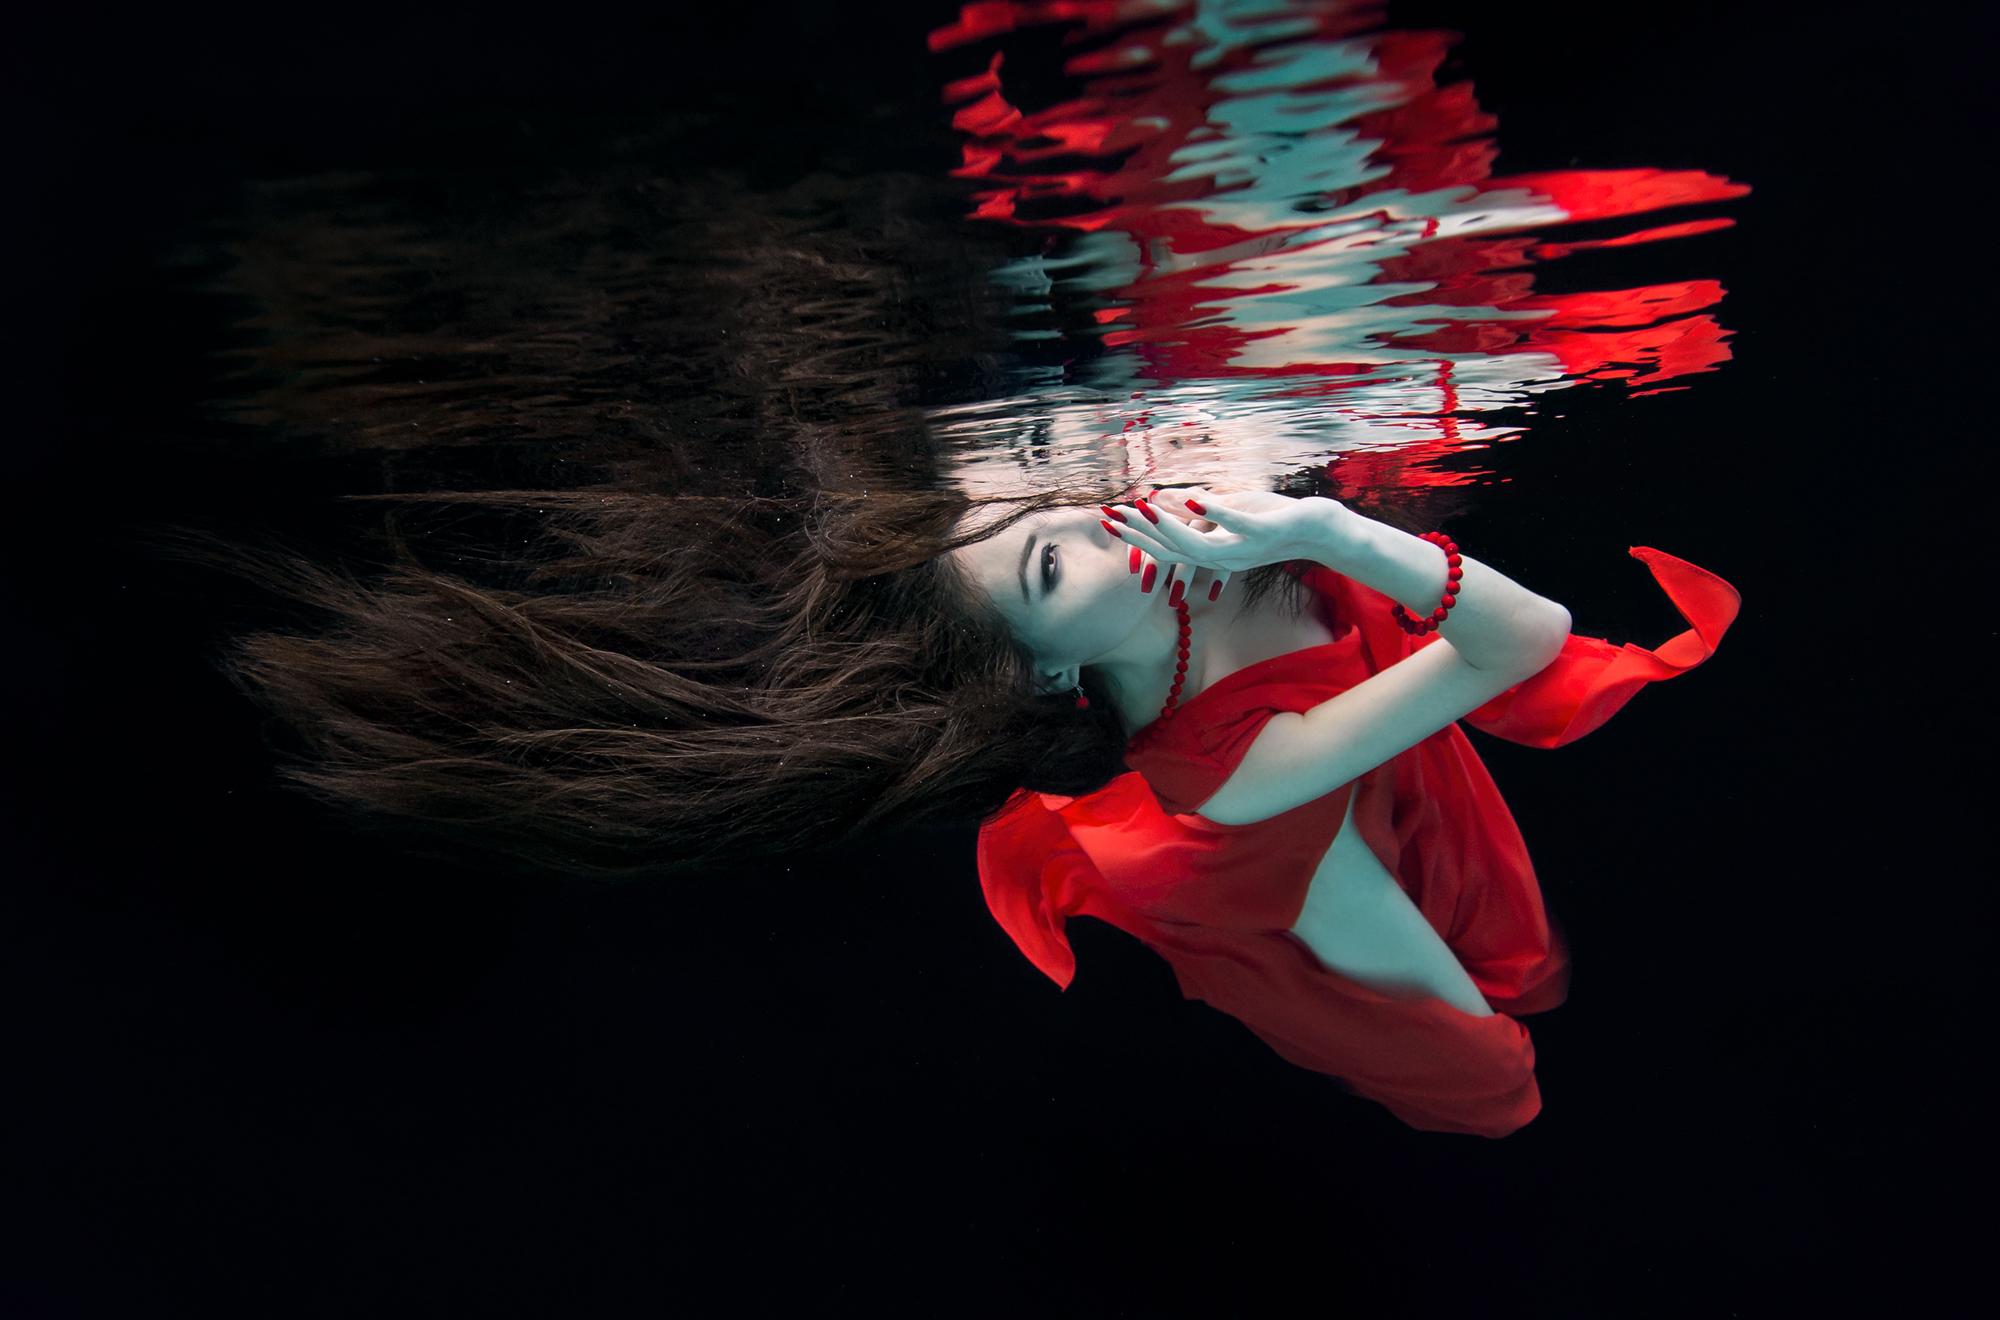 Alex Sher Figurative Photograph - Water Lily - underwater photograph - print on aluminum 23" x 36"